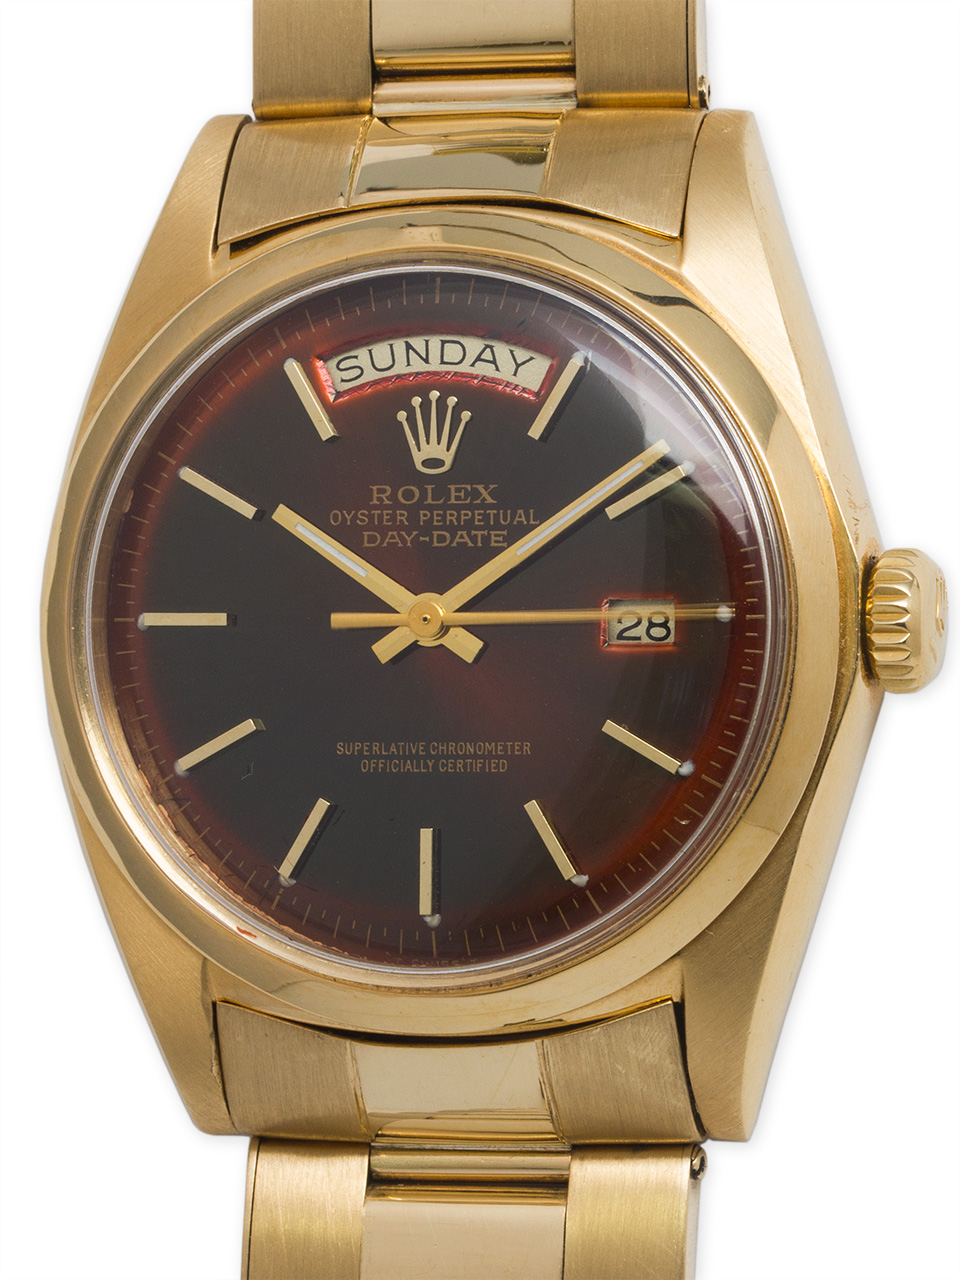 Rolex 18K YG Day Date President circa 1971 "Rootbeer"